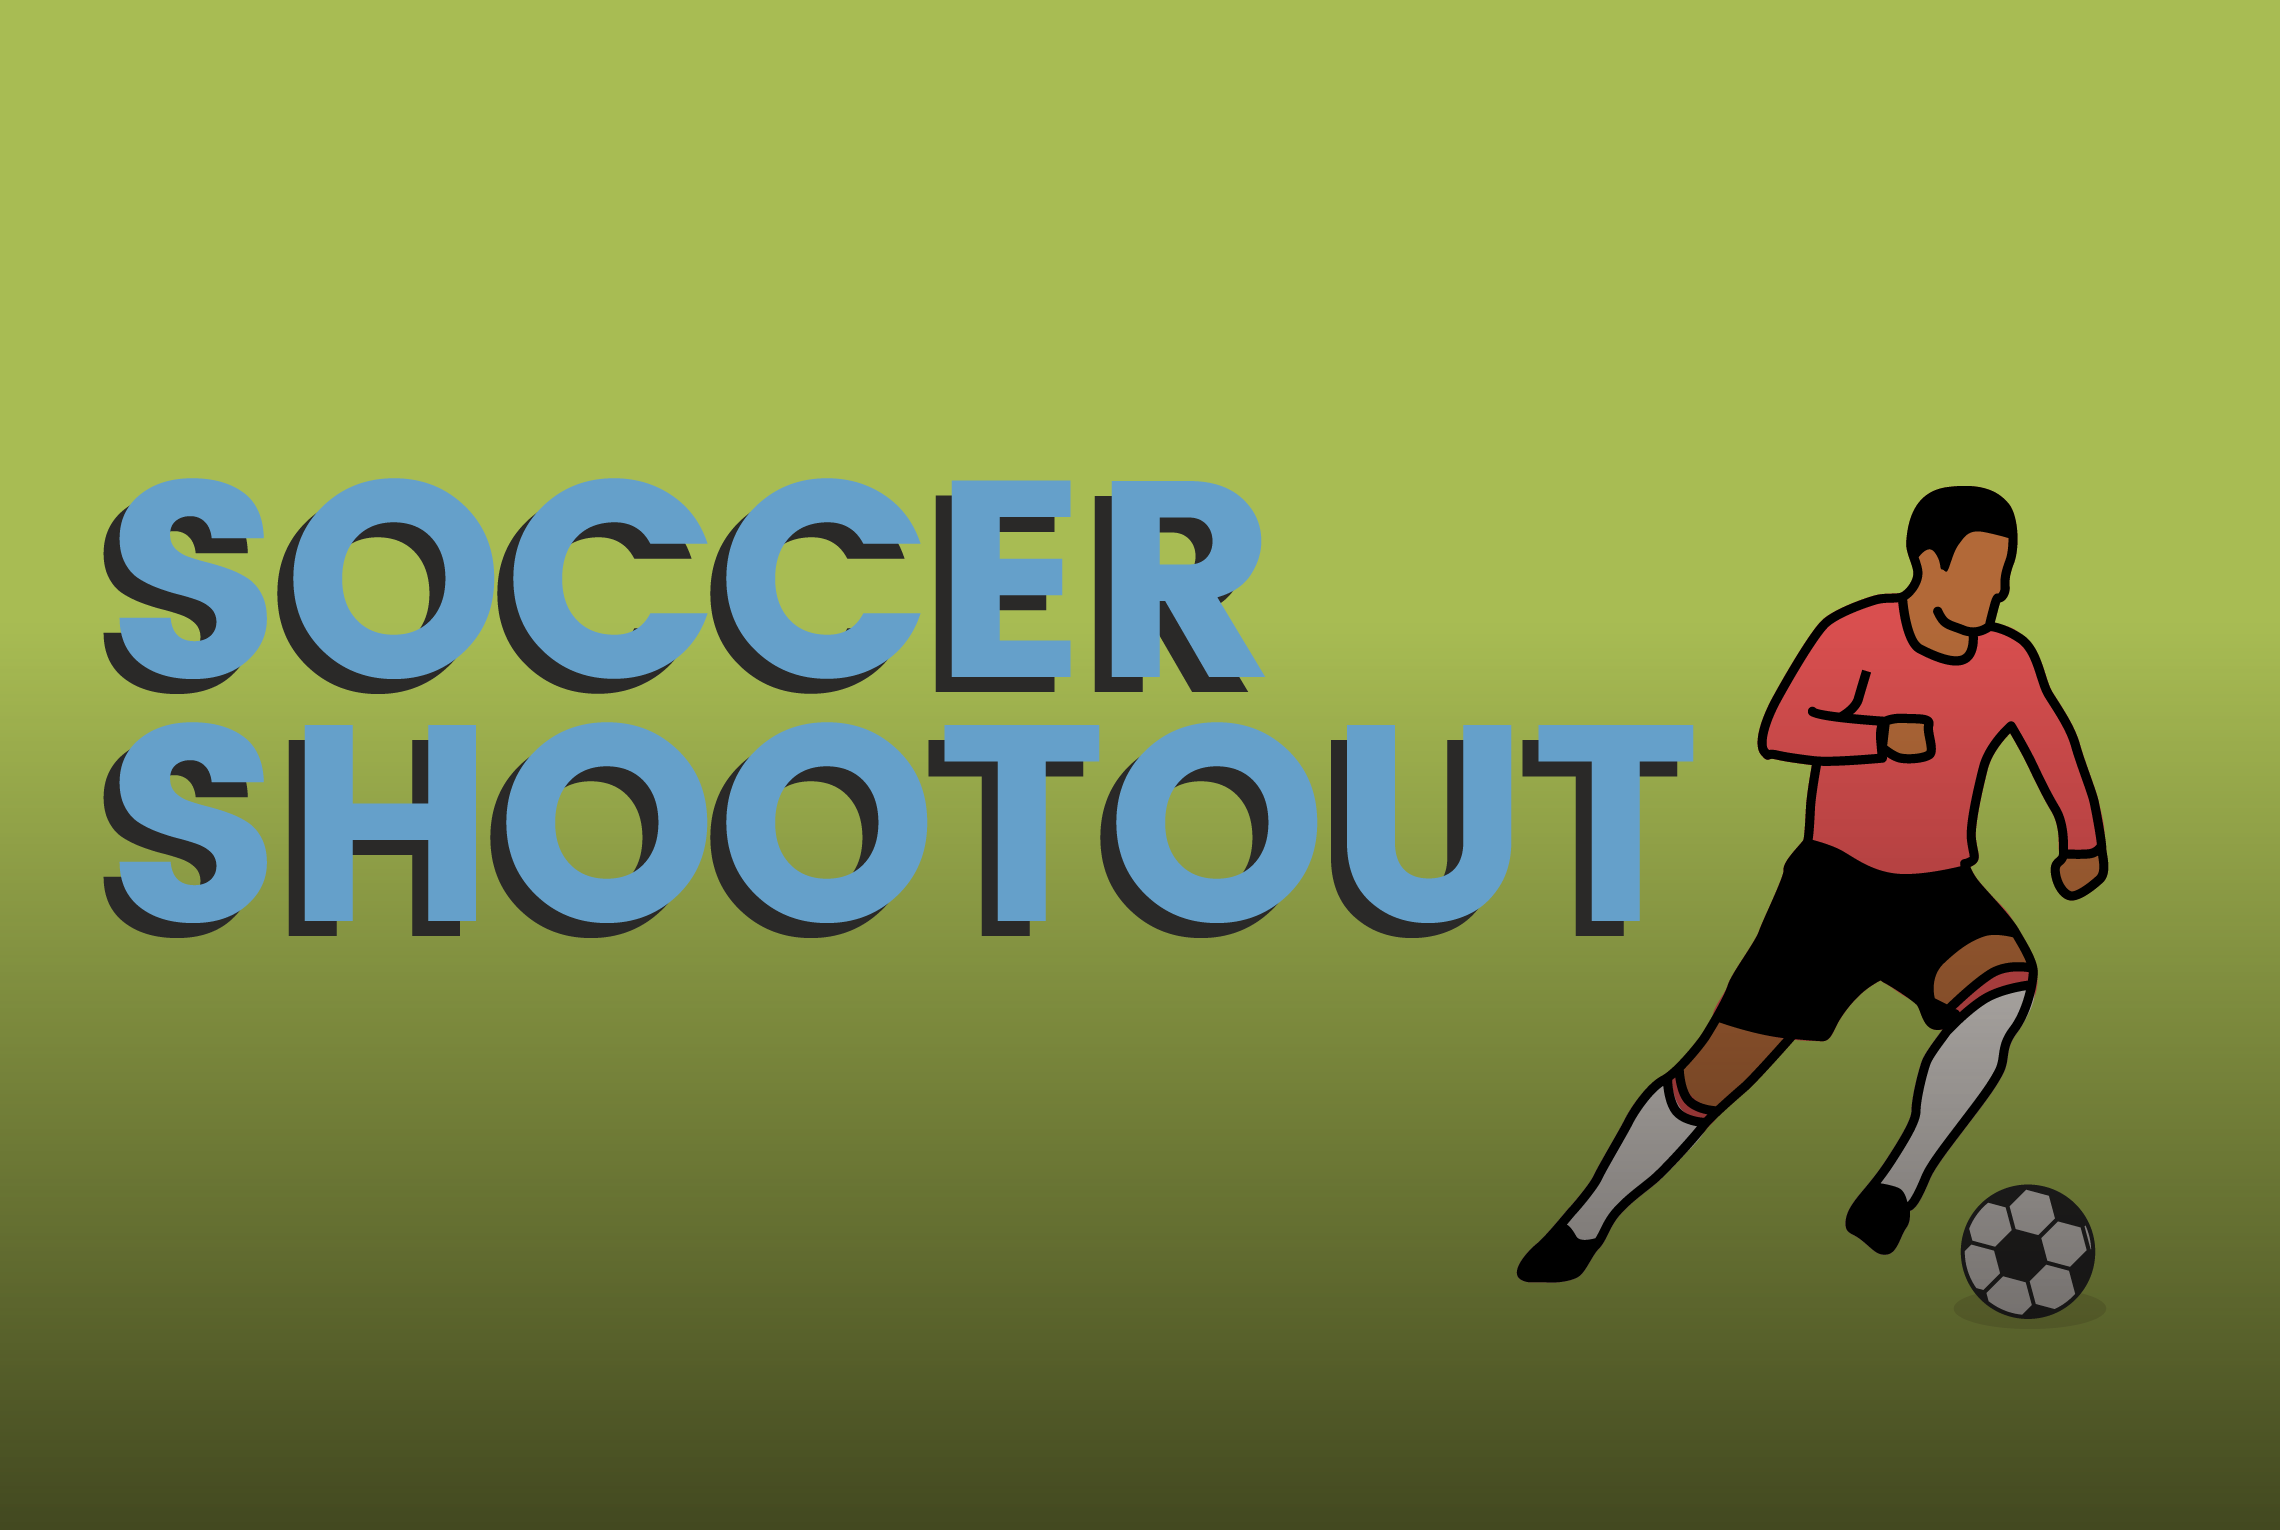 Soccer Shootout - a game on Funbrain